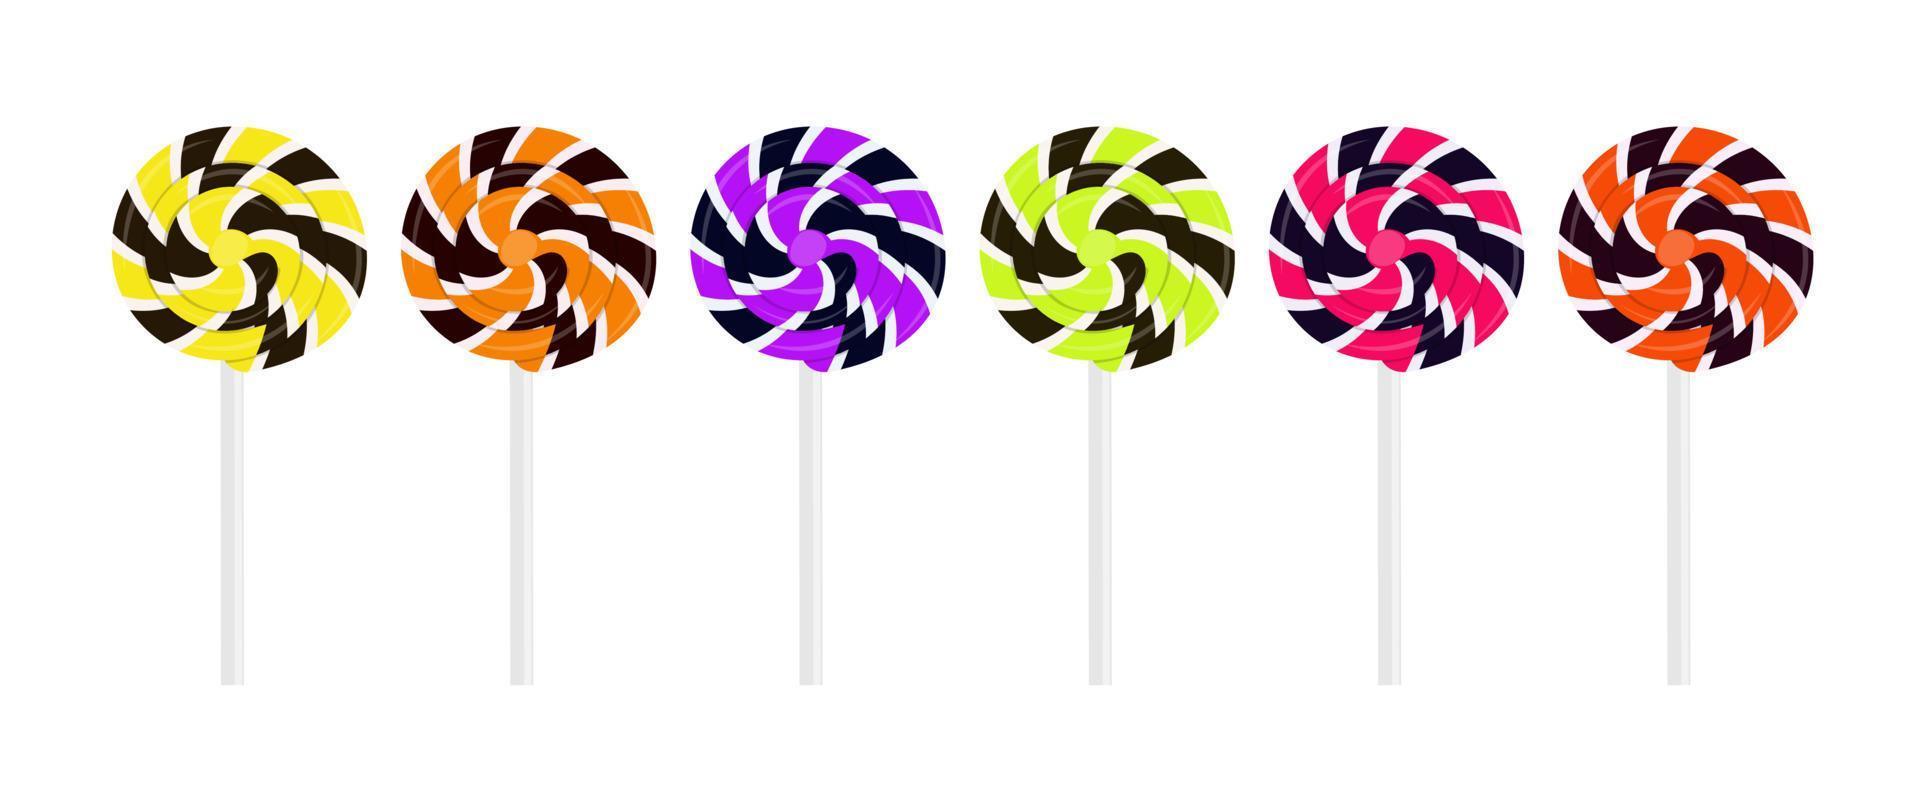 Set of spiral lollipops in different colors vector